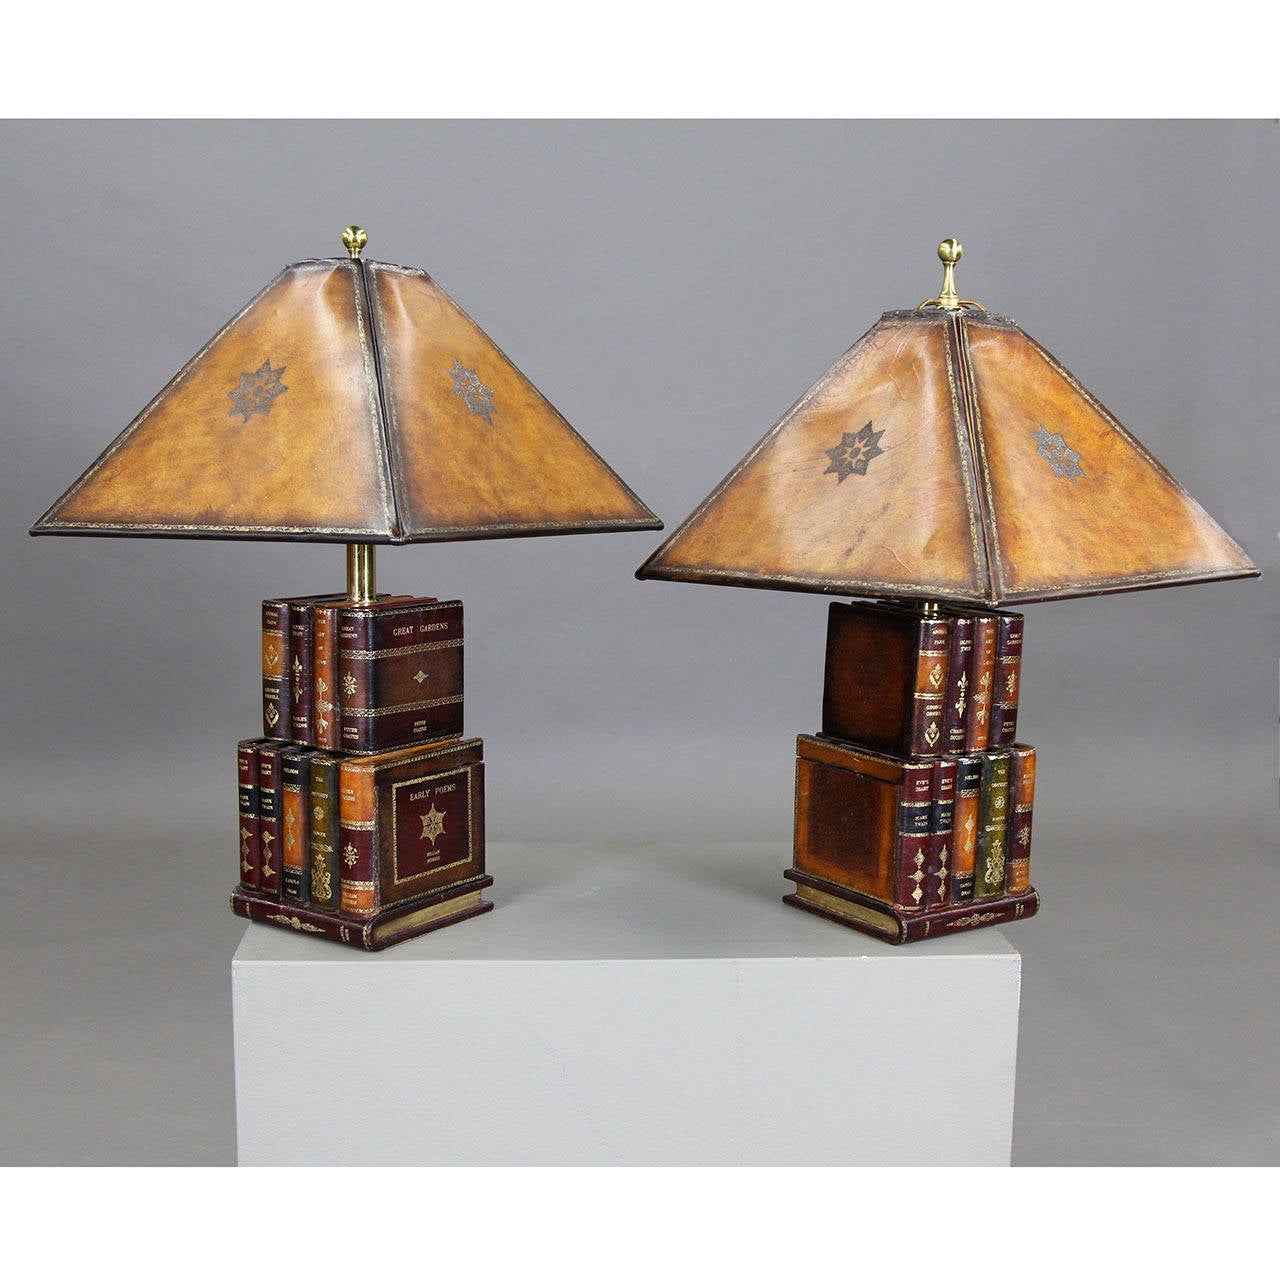 Two leather covered wooden lamps with tobacco leather shades. There are two hidden compartments on each.